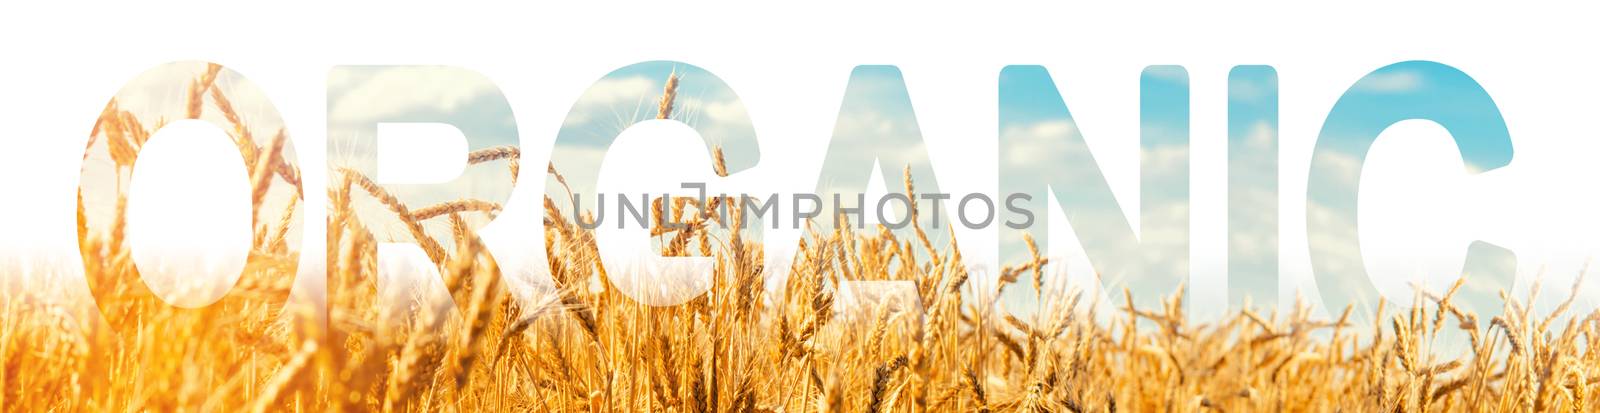 The inscription Organic on the background of a field of wheat plantation. Production of organic agricultural products. Environmentally friendly and safe product without chemicals.